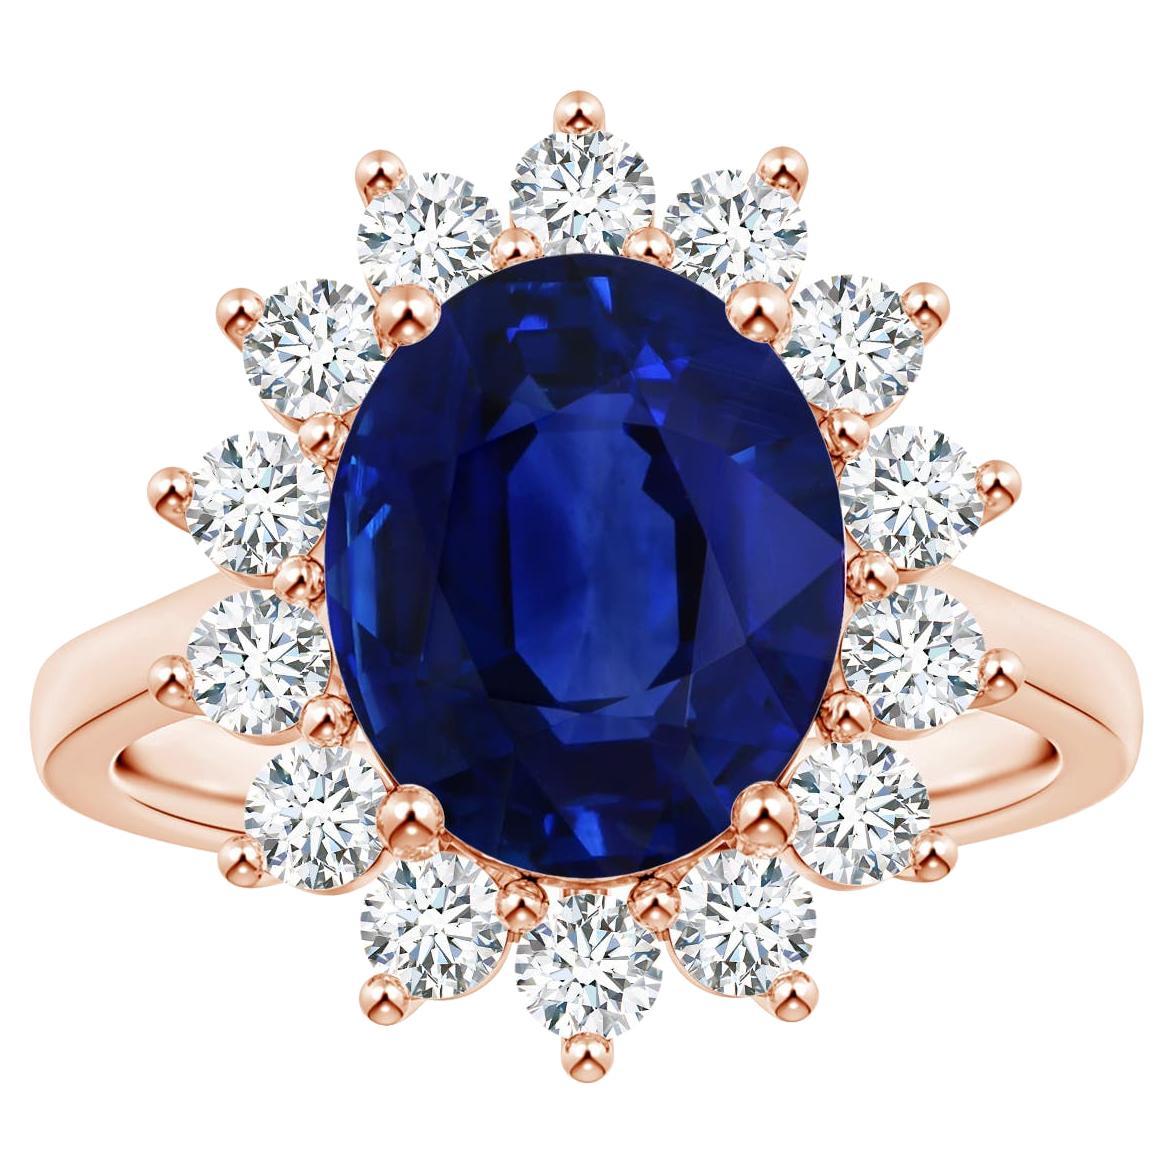 ANGARA Princess Diana Inspired GIA Certified Sapphire Halo Ring in Rose Gold